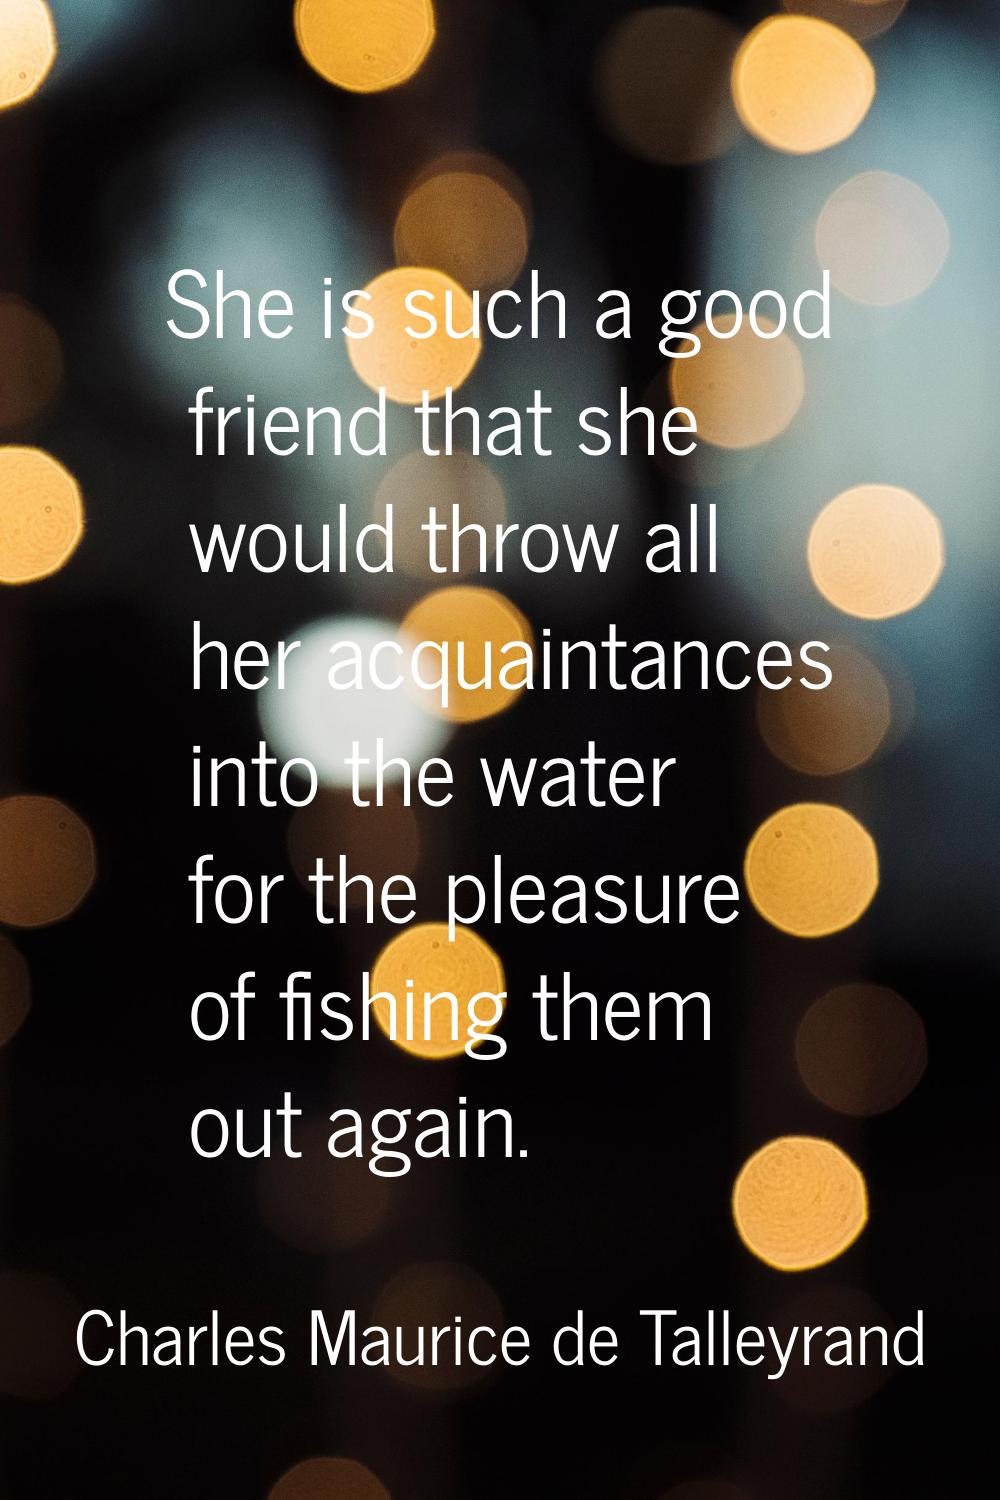 She is such a good friend that she would throw all her acquaintances into the water for the pleasur